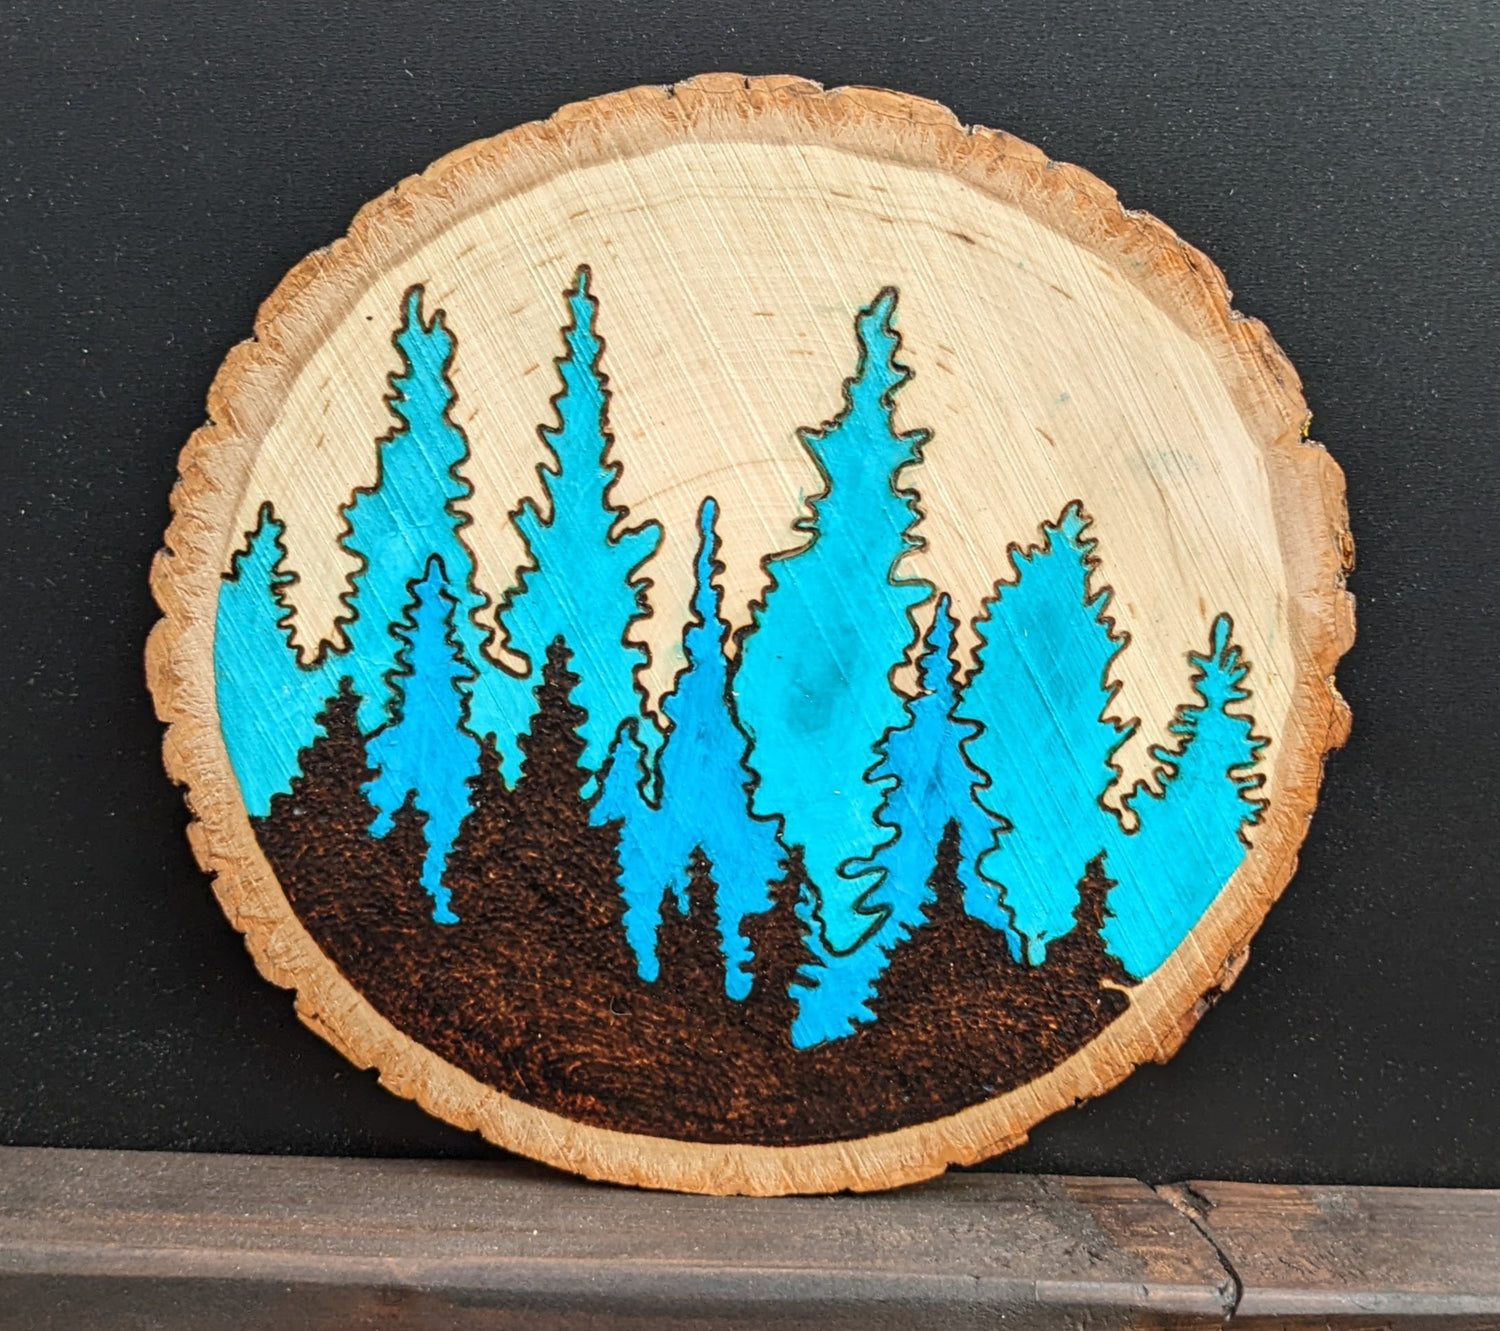 Wood burned Art by Wood Wanderlust of evergreen forest on round log crosscut